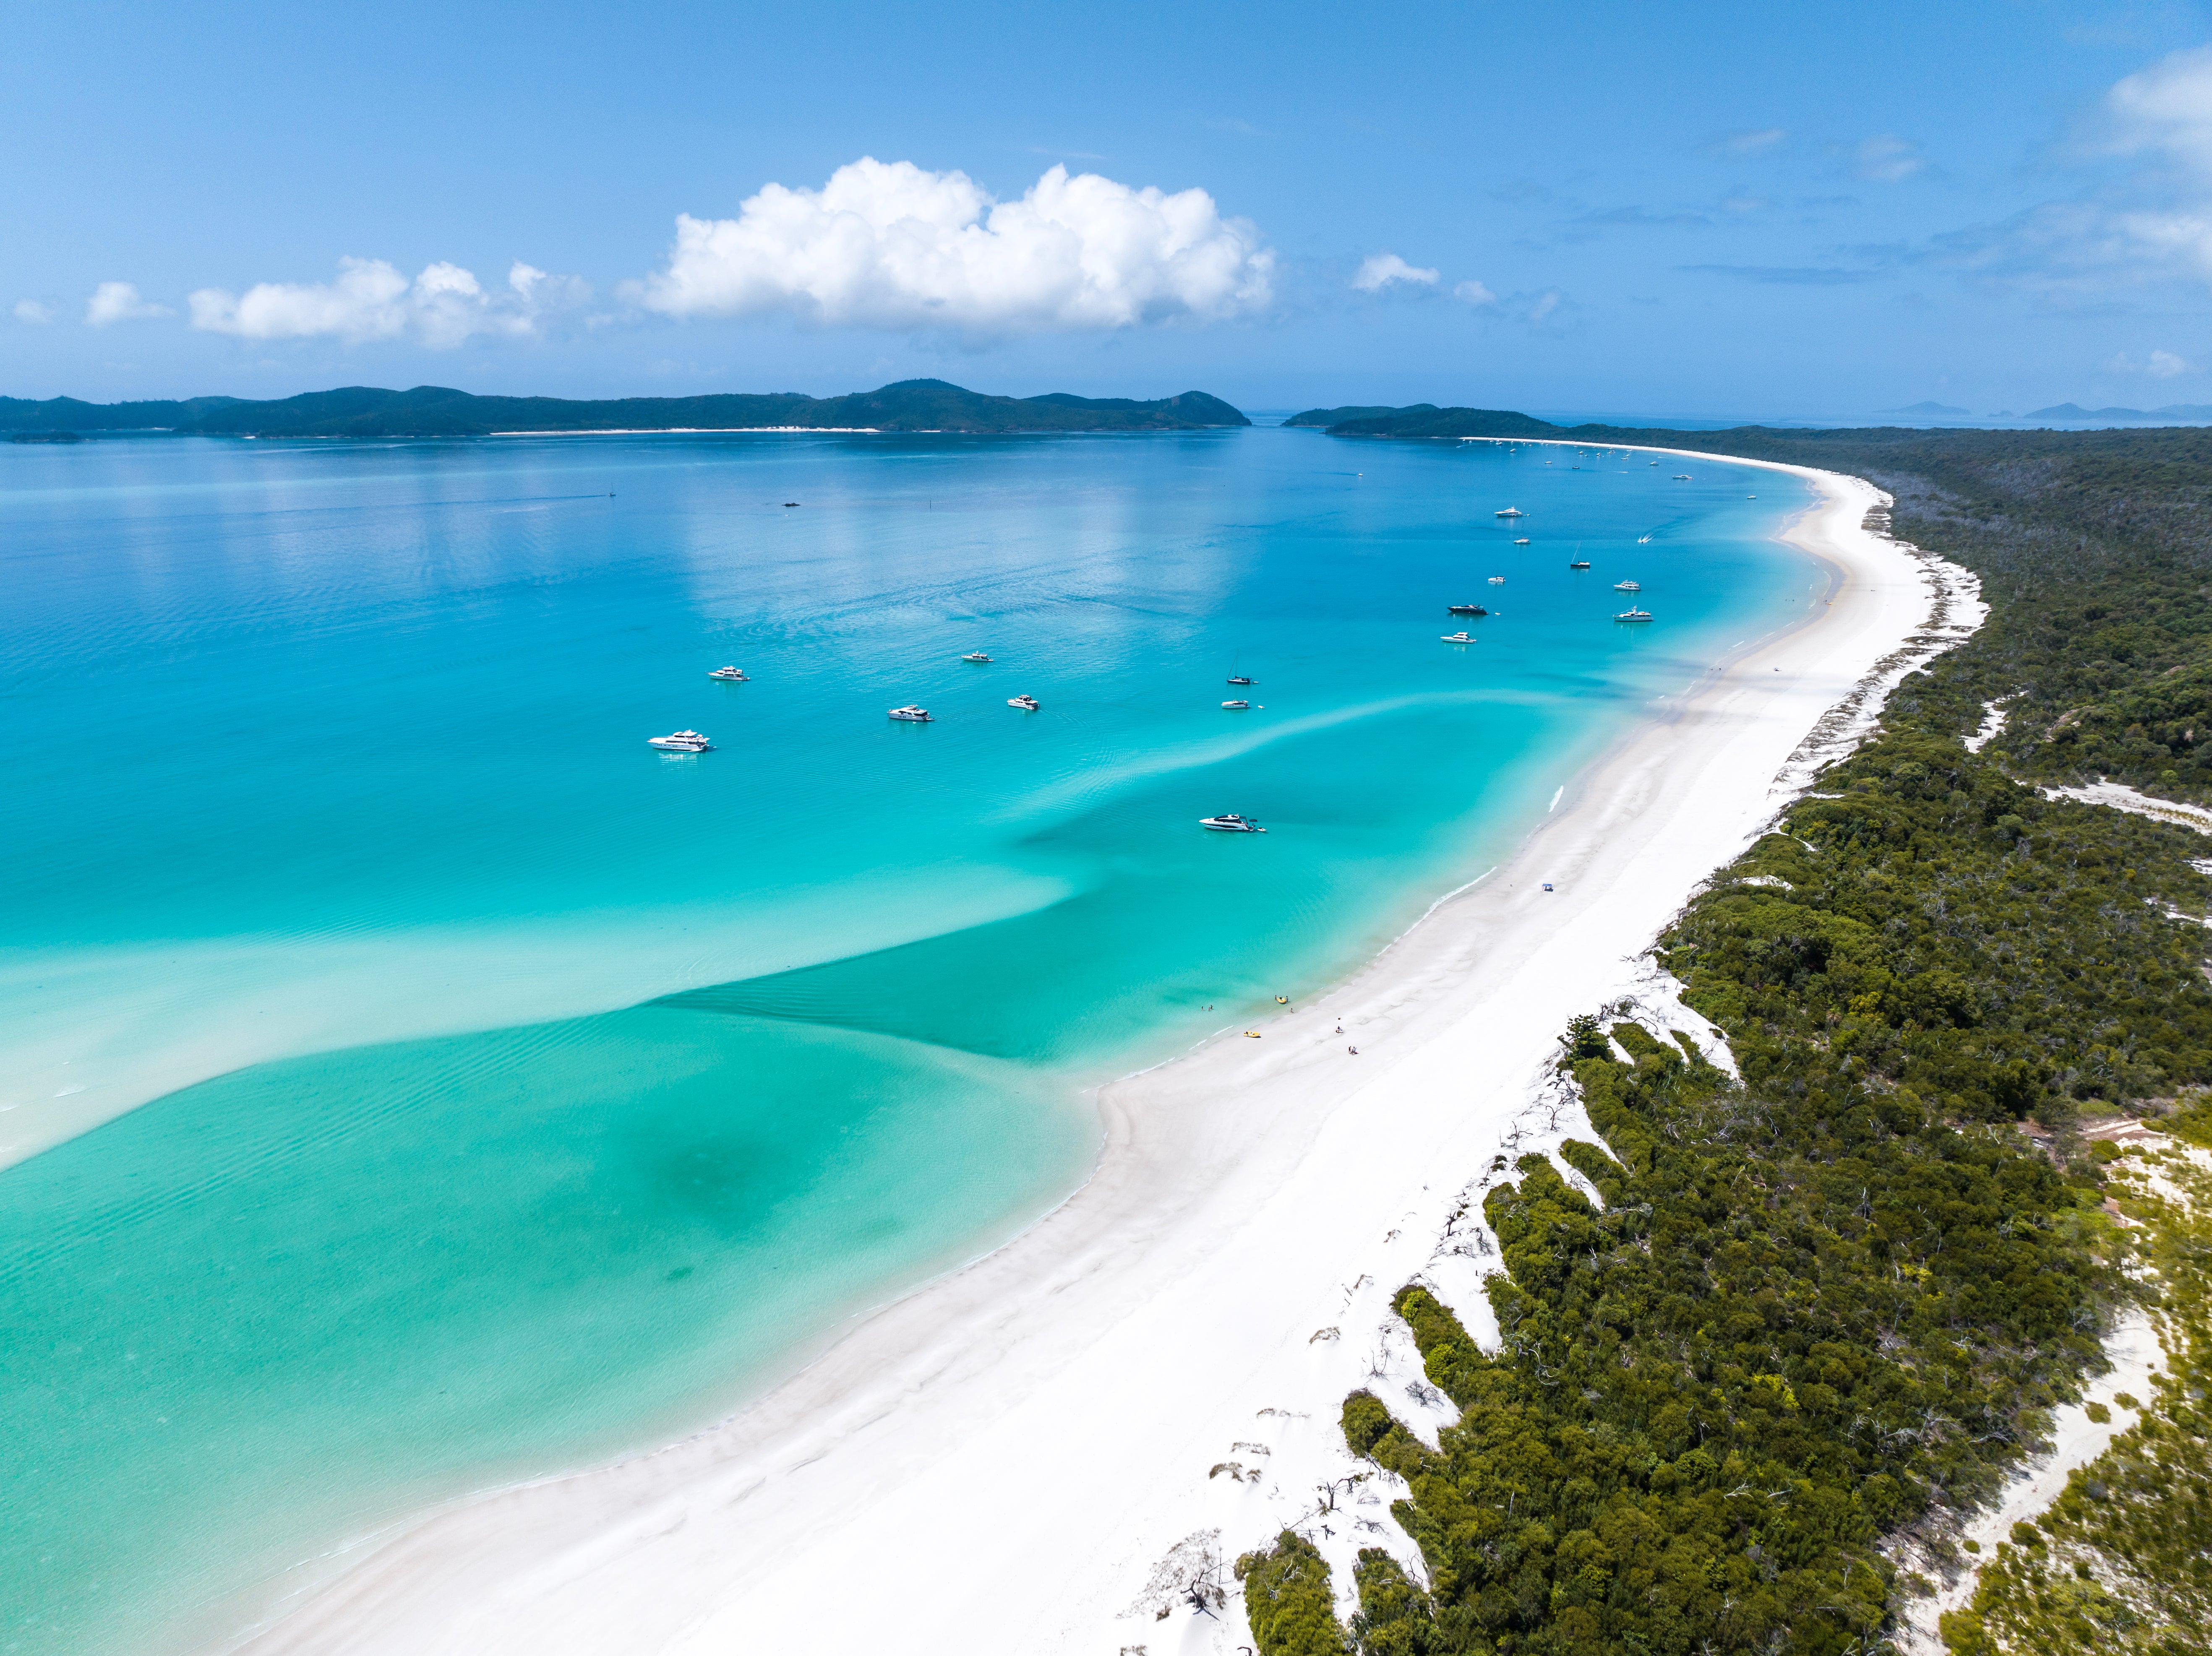 Part of the Whitsunday Islands National Park, Whitehaven Beach is a hit with tourists